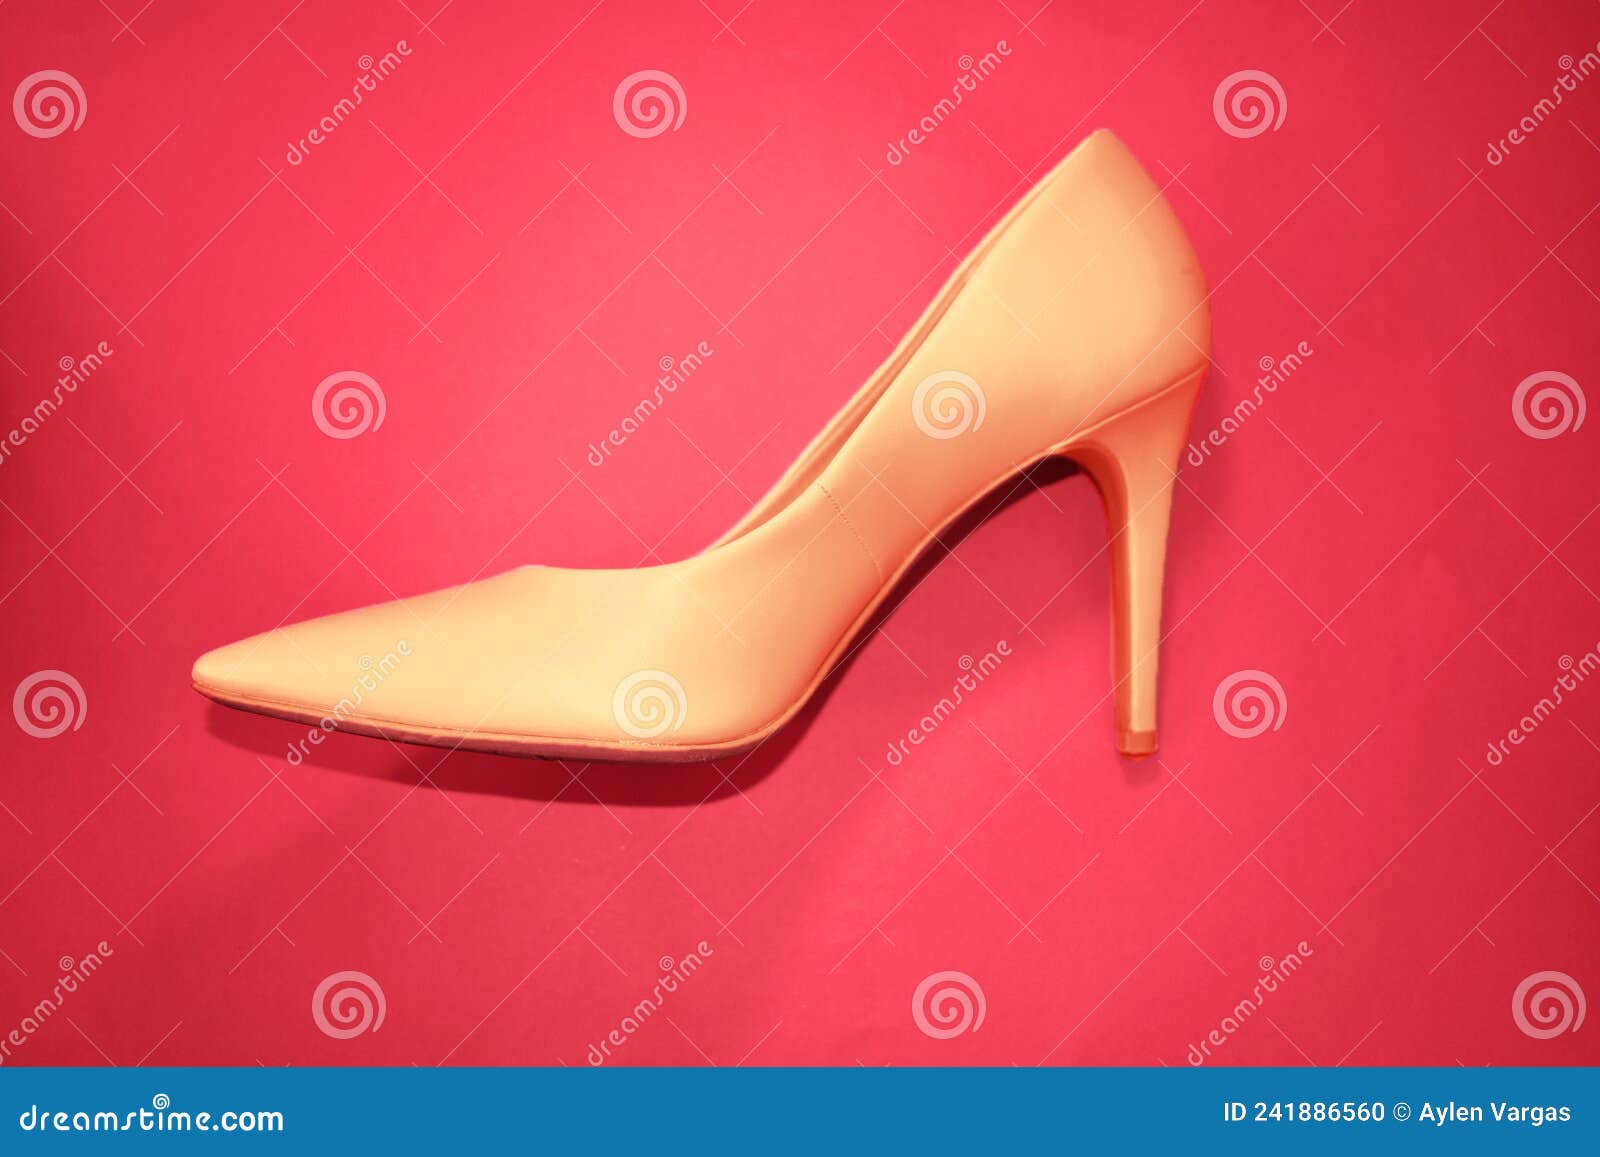 female heels shoes on a red background